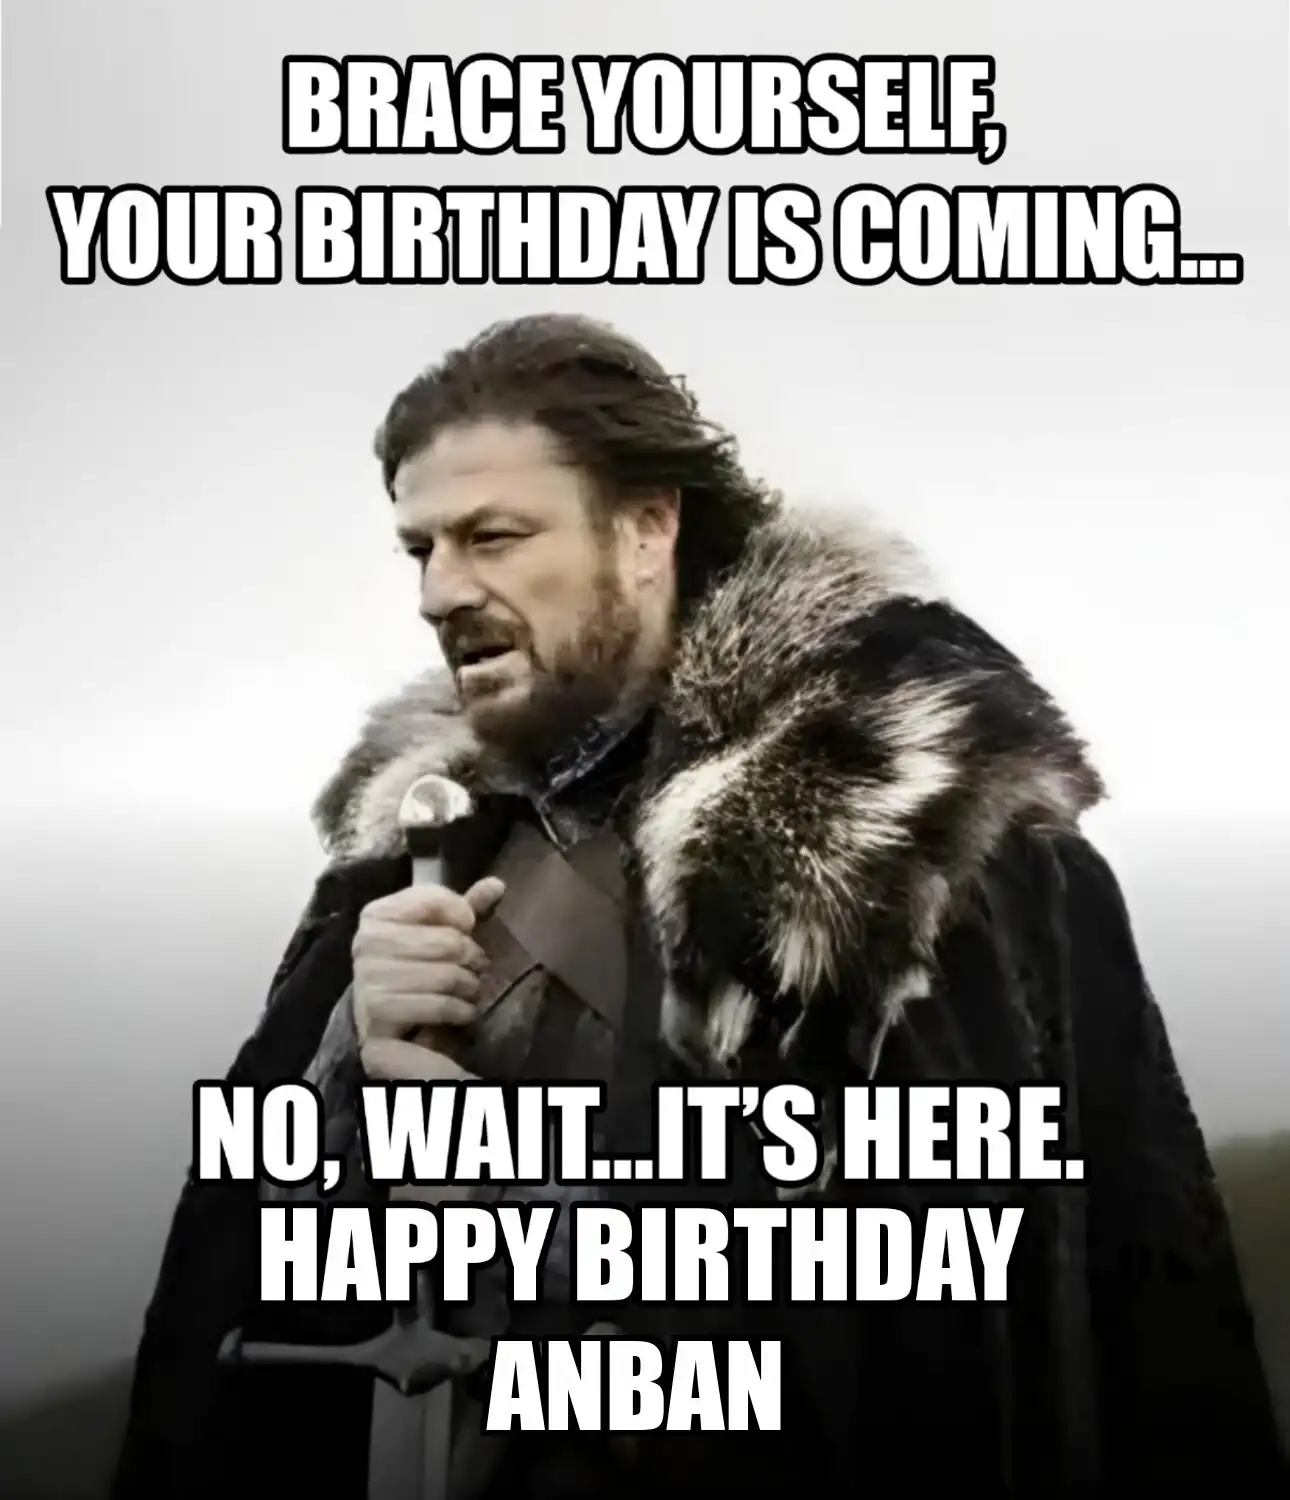 Happy Birthday Anban Brace Yourself Your Birthday Is Coming Meme